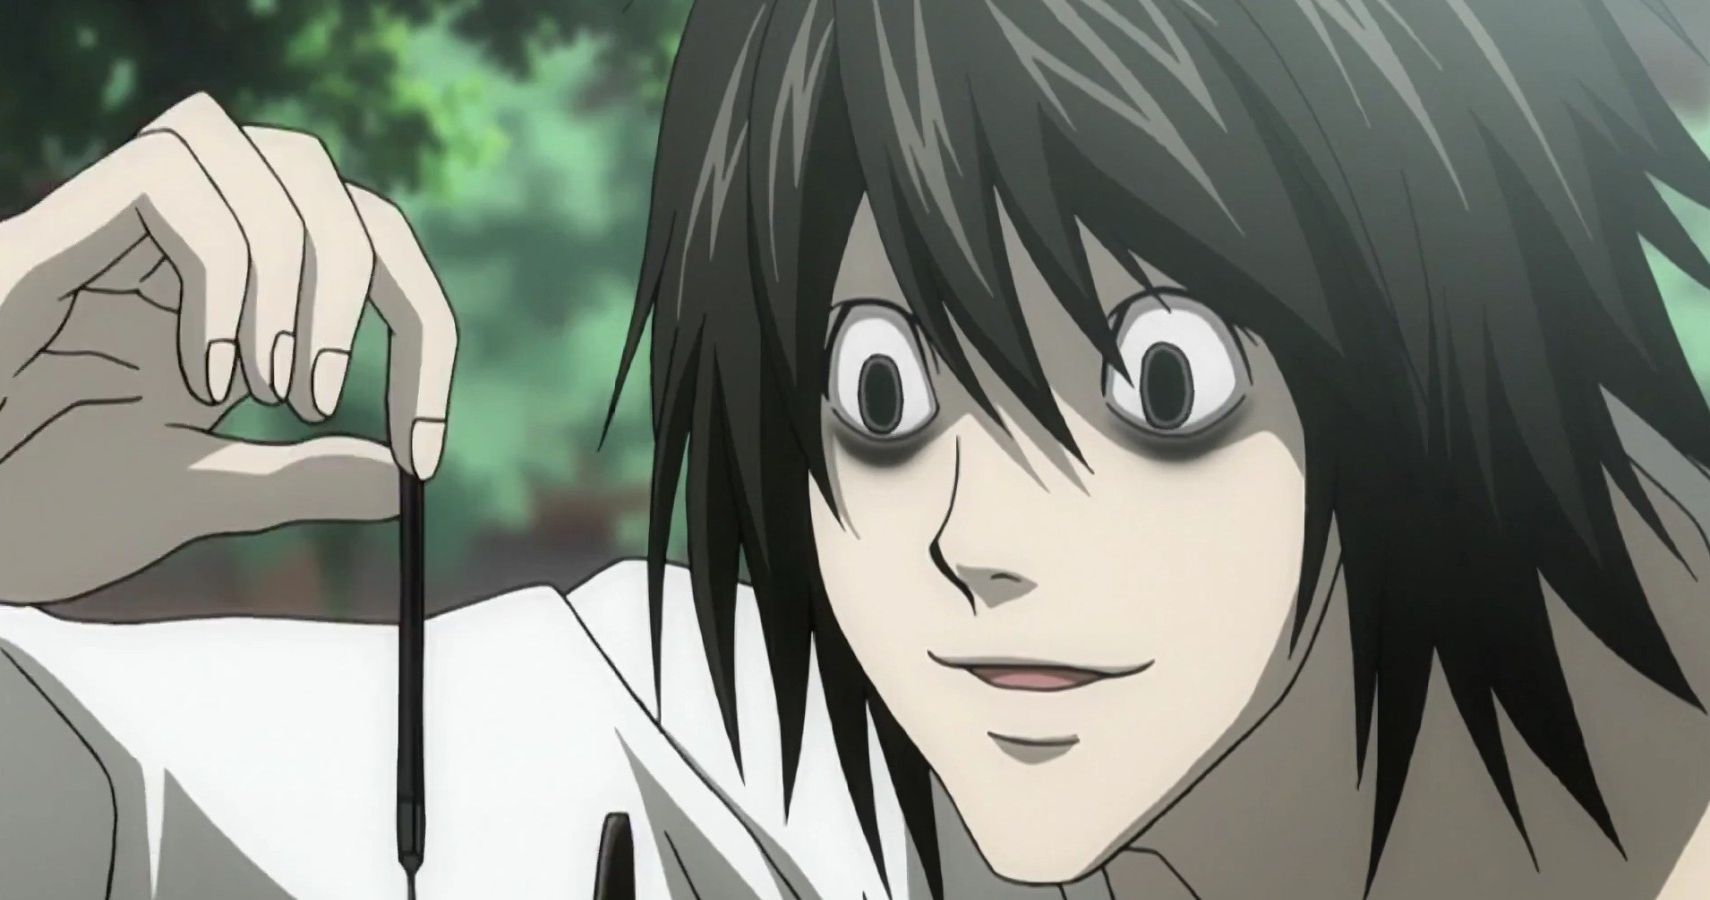 In Death Note, are BB and L the same person? - Quora